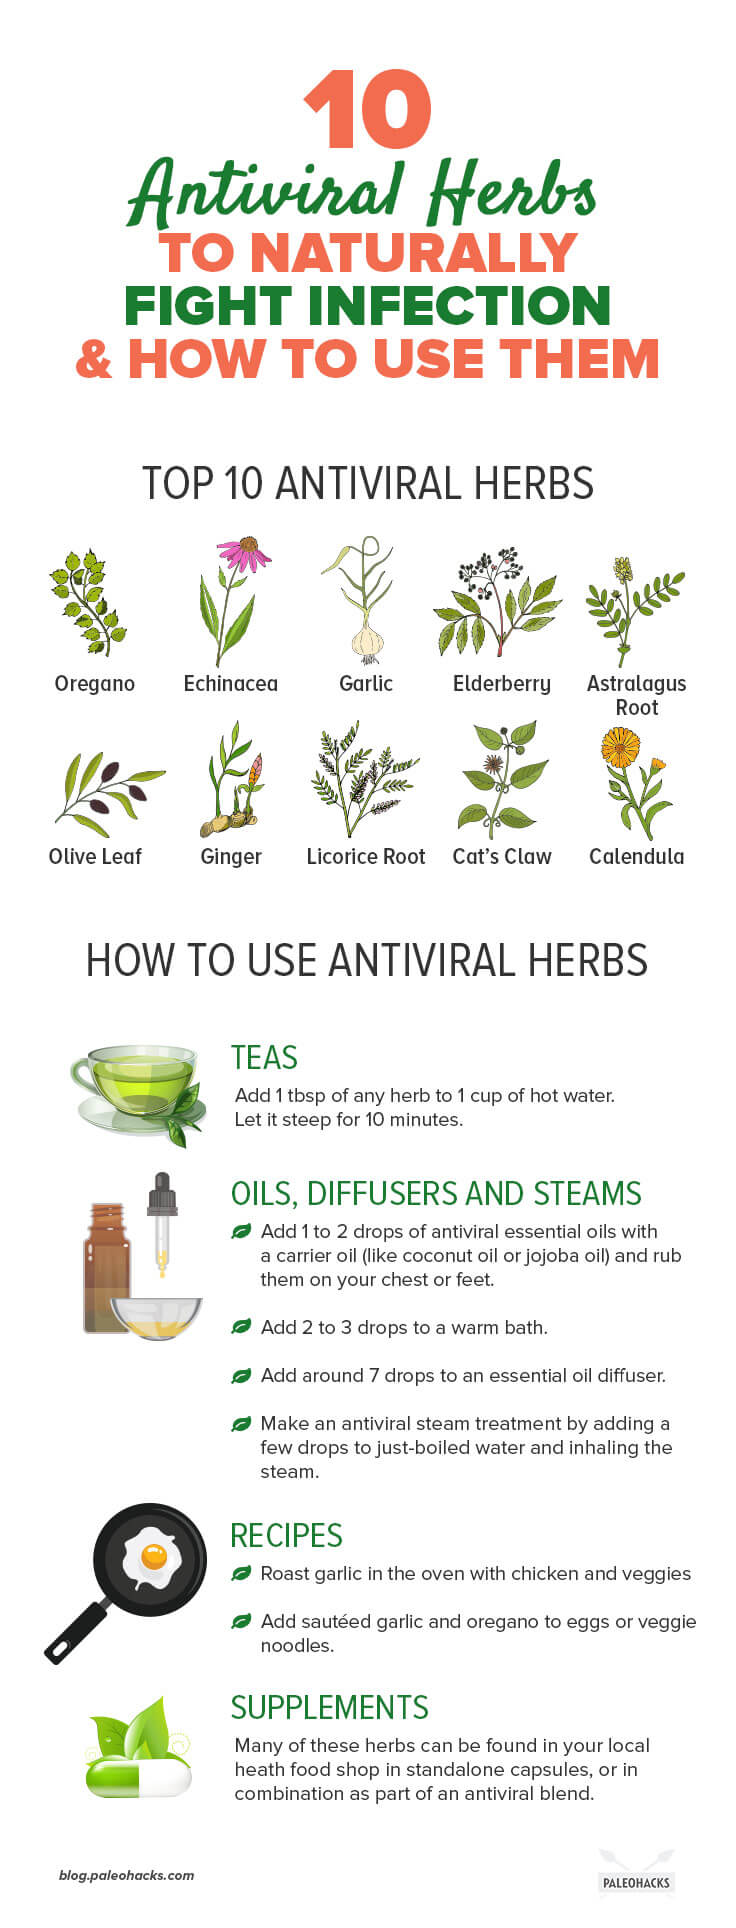 The next time you're fighting common cold or the flu, reach for these antiviral herbs. Combat the nausea and congestion with zero side effects!